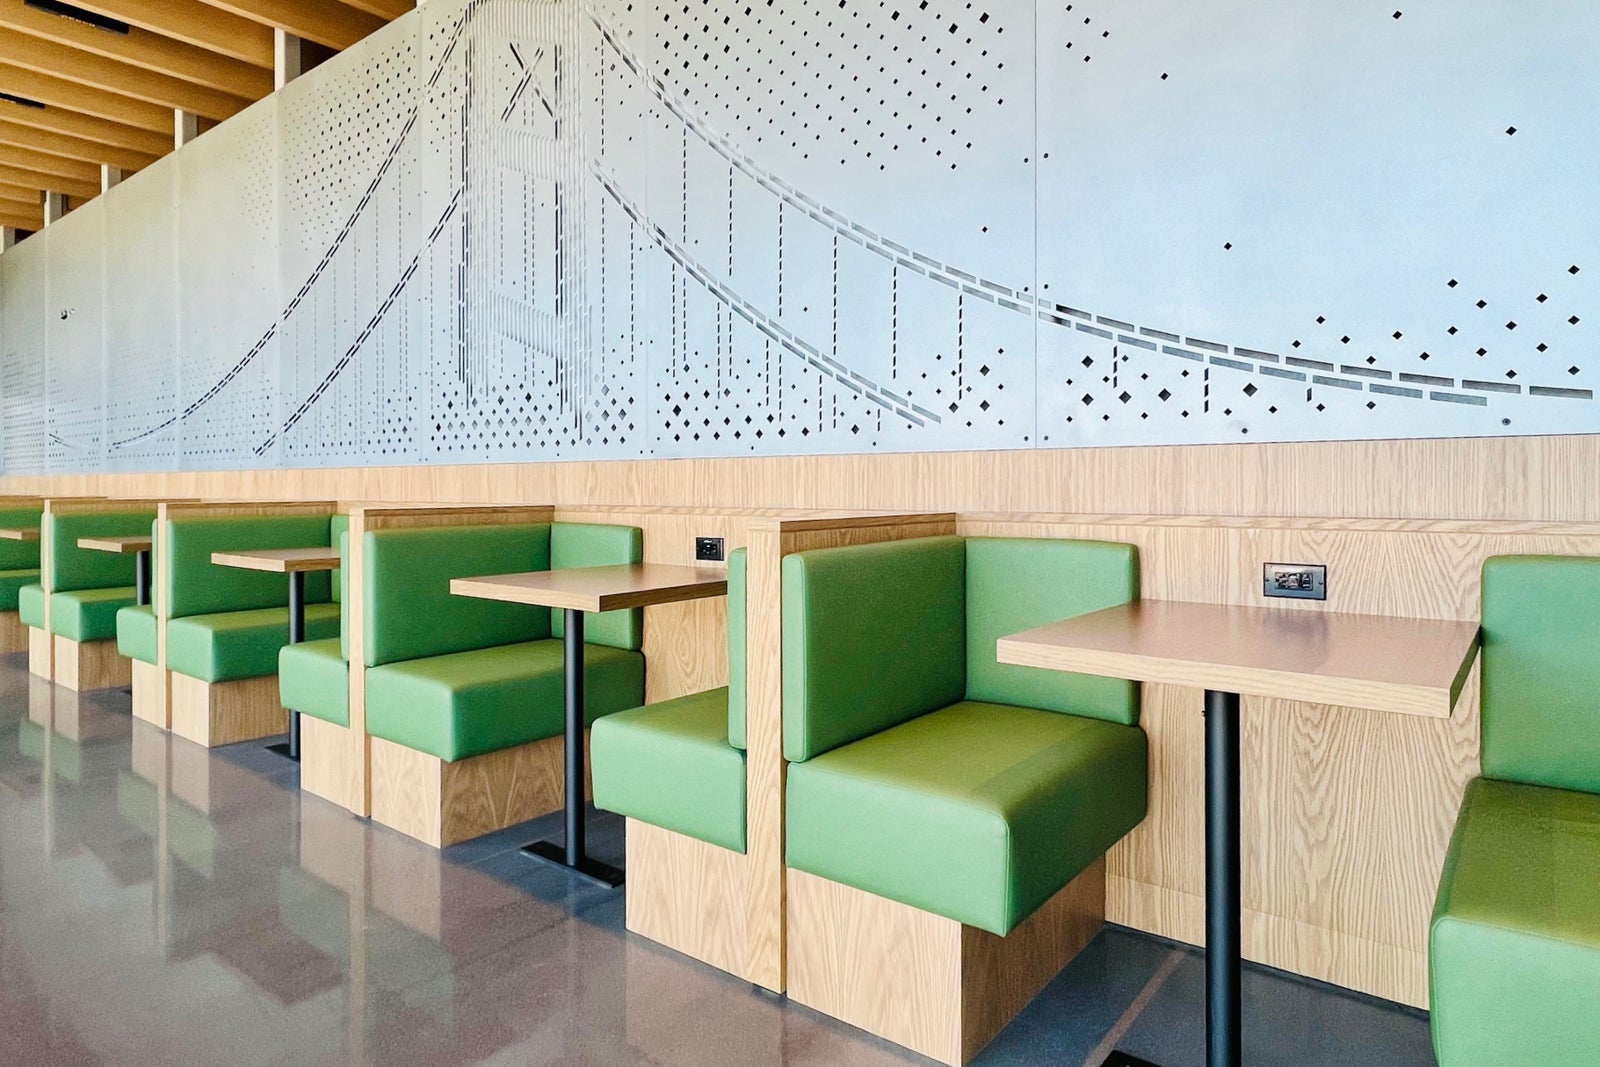 Take a look inside Alaska Airlines’ swanky new lounge at SFO